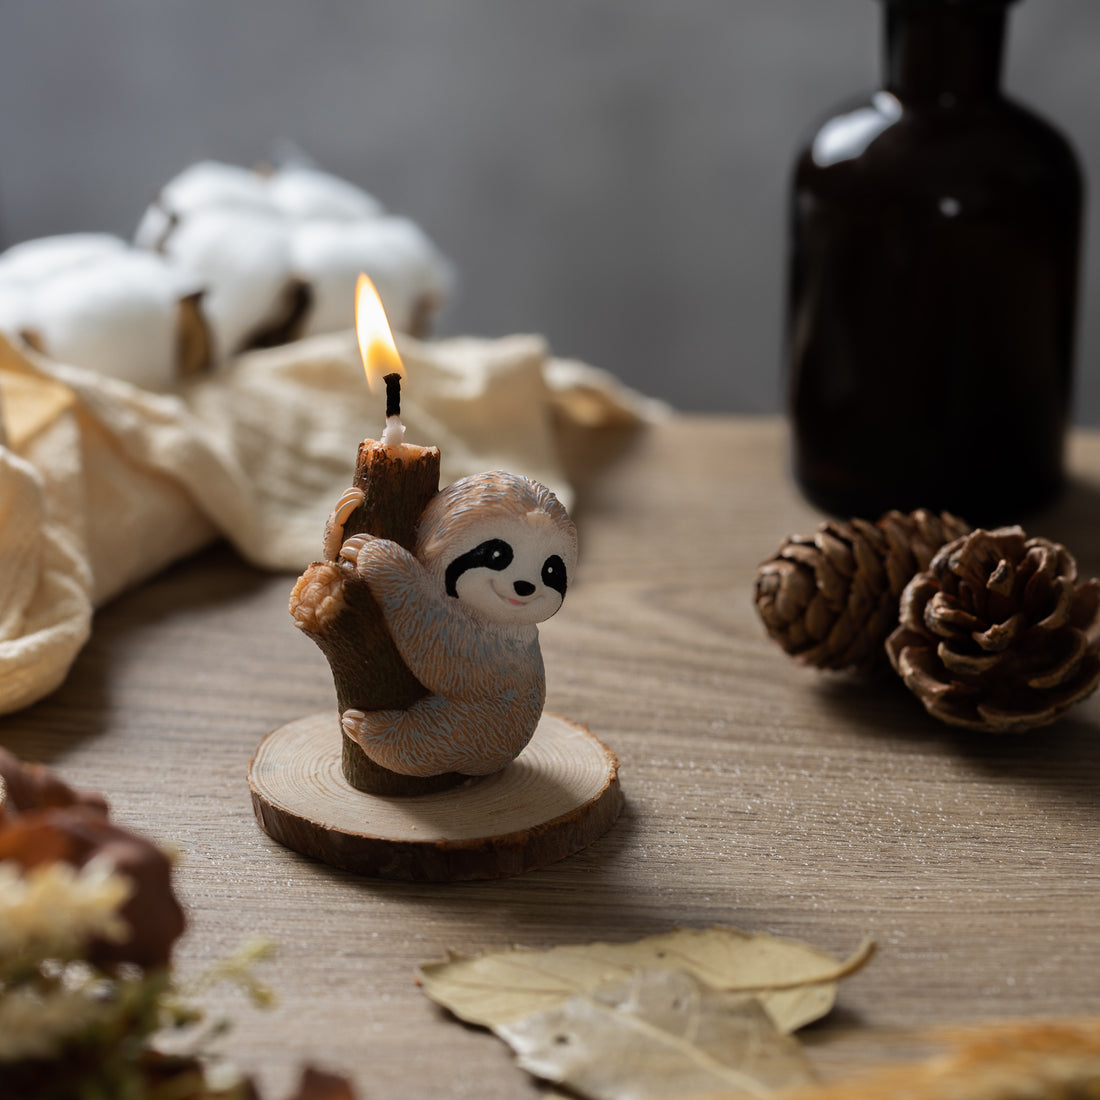 Making home extra special with this Baby Sloth Candle.